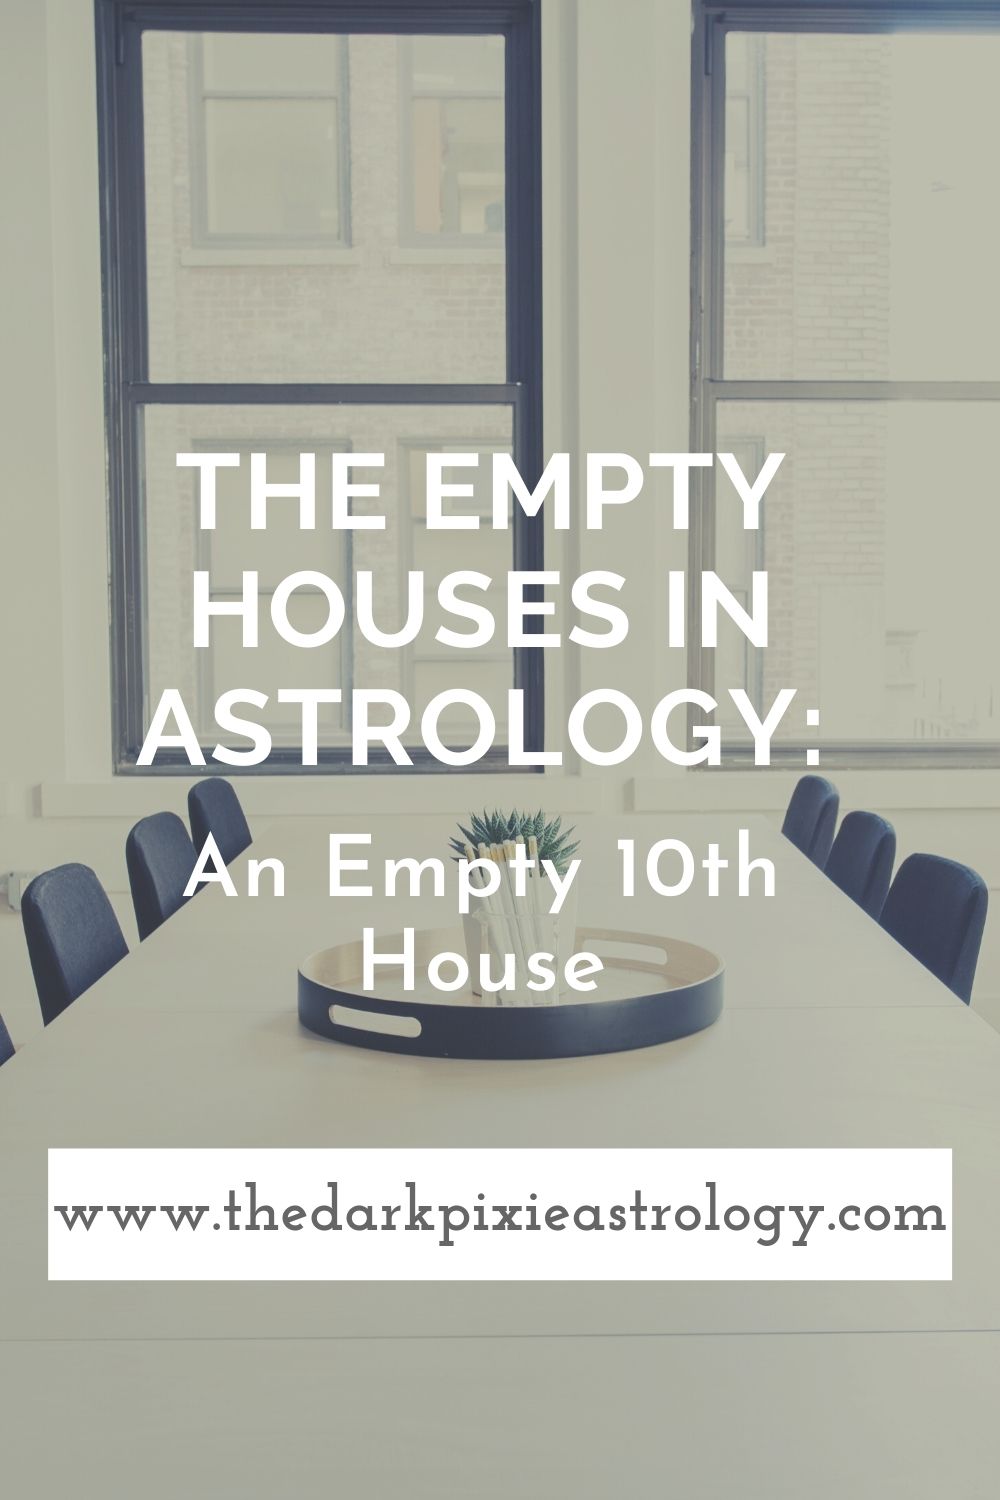 The Empty Houses in Astrology: An Empty 10th House - The Dark Pixie Astrology